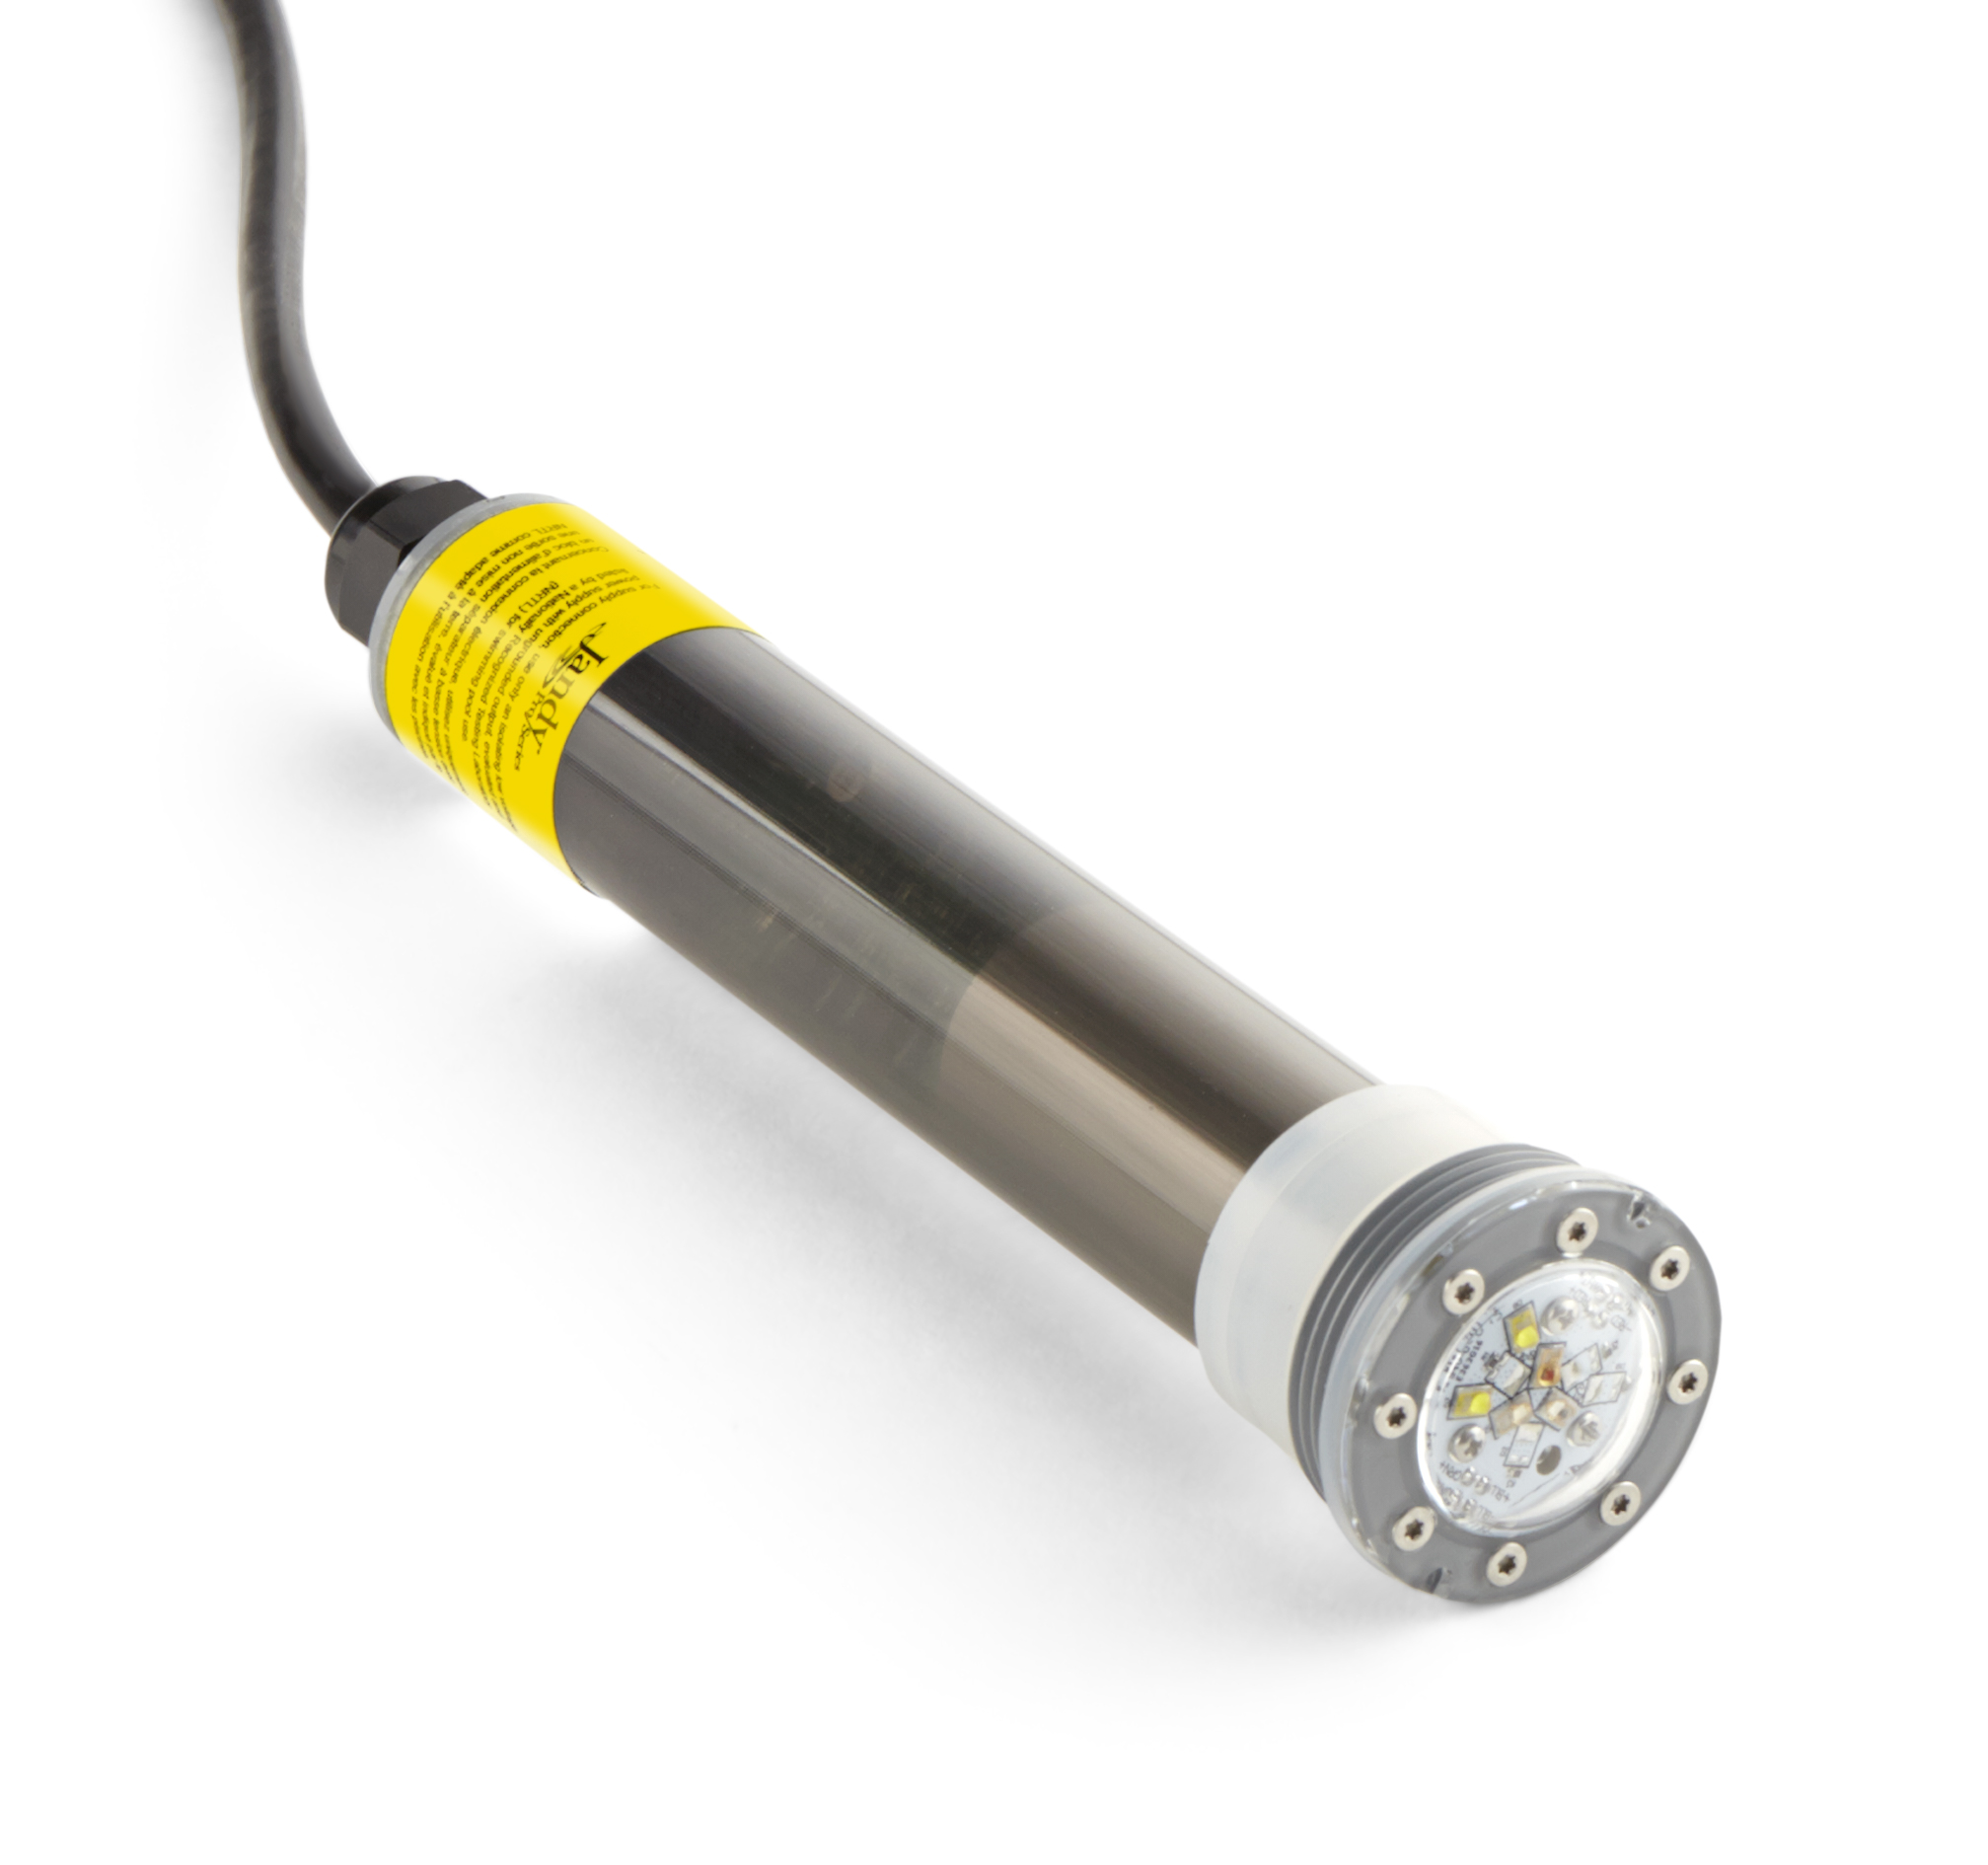 Jandy Pro Nicheless Color LED Light 30 Watts with 150' Cord